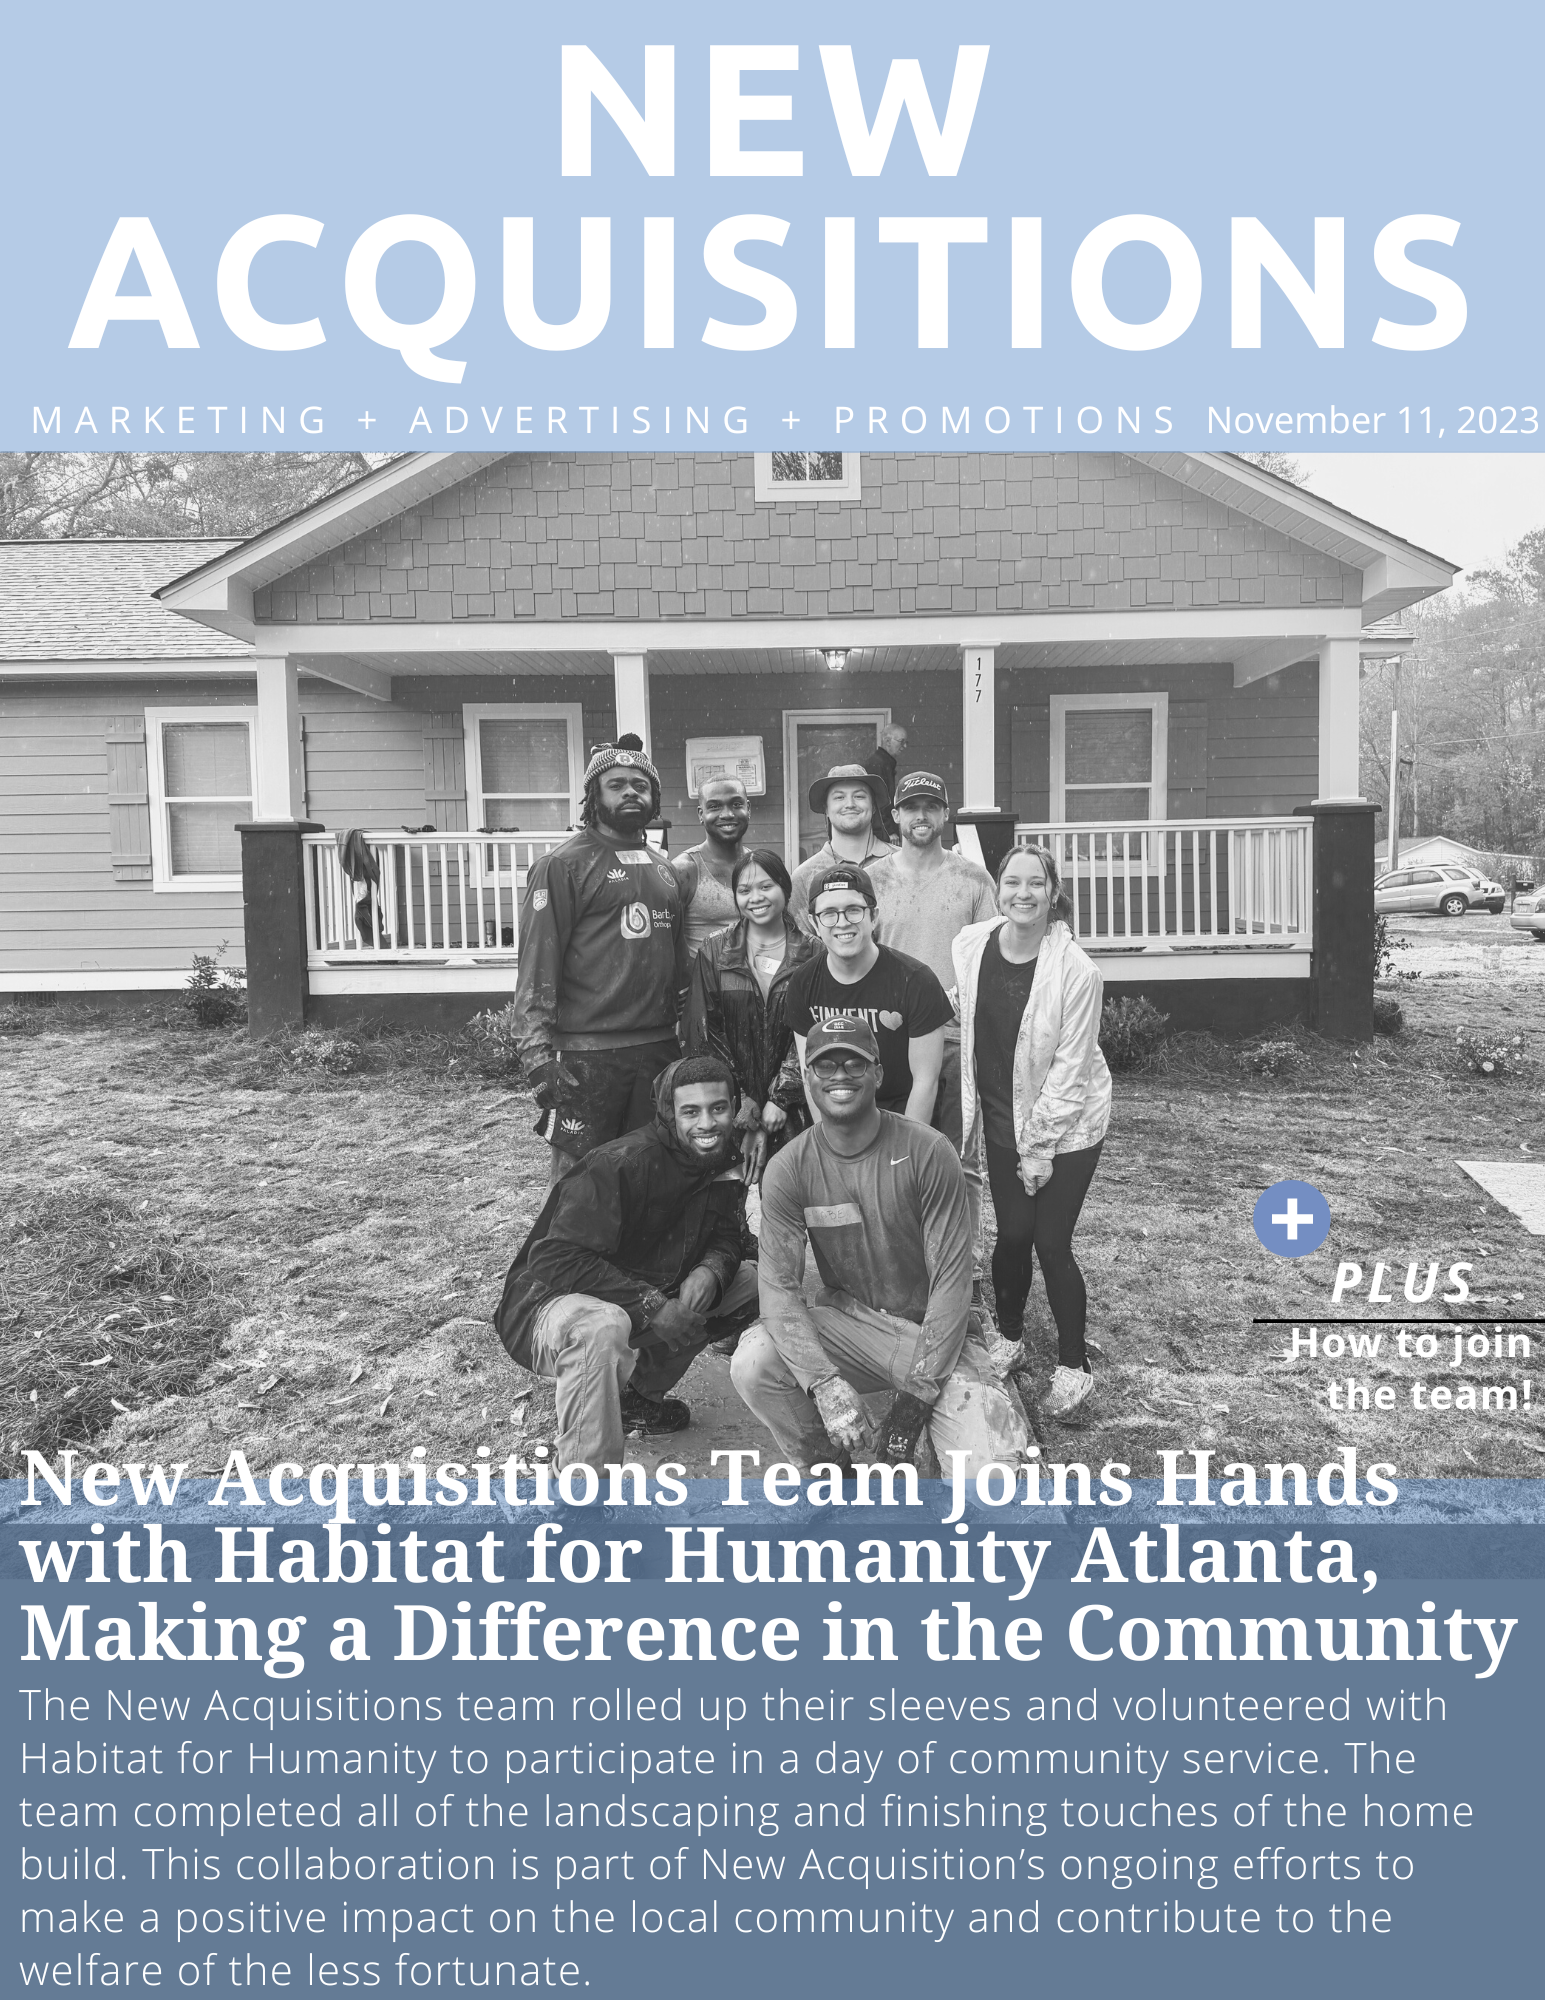 New Acquisitions Team Joins Hands with Atlanta Habitat for Humanity